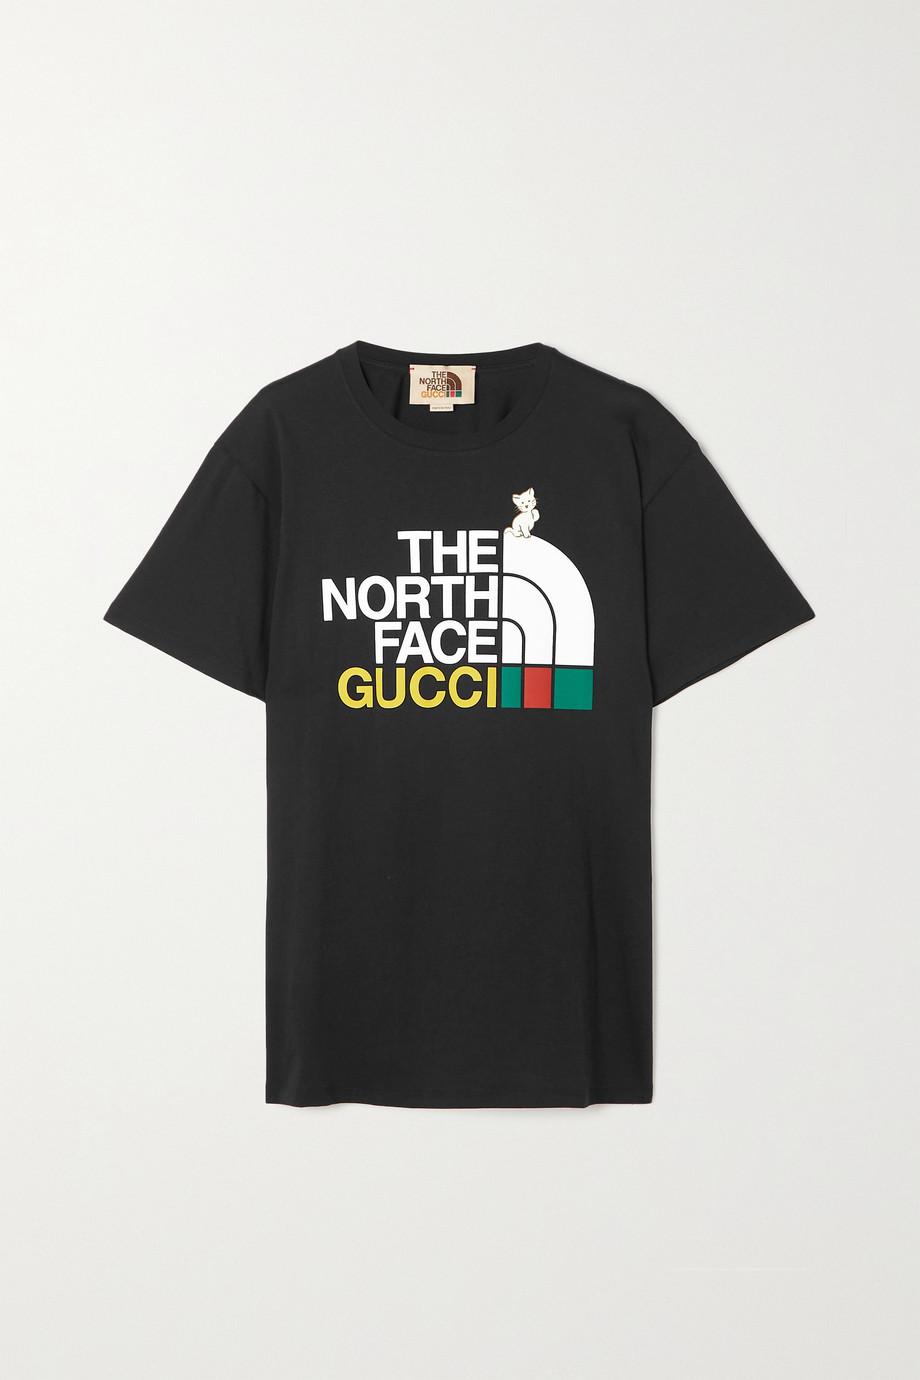 + The North Face printed cotton-jersey T-shirt by GUCCI